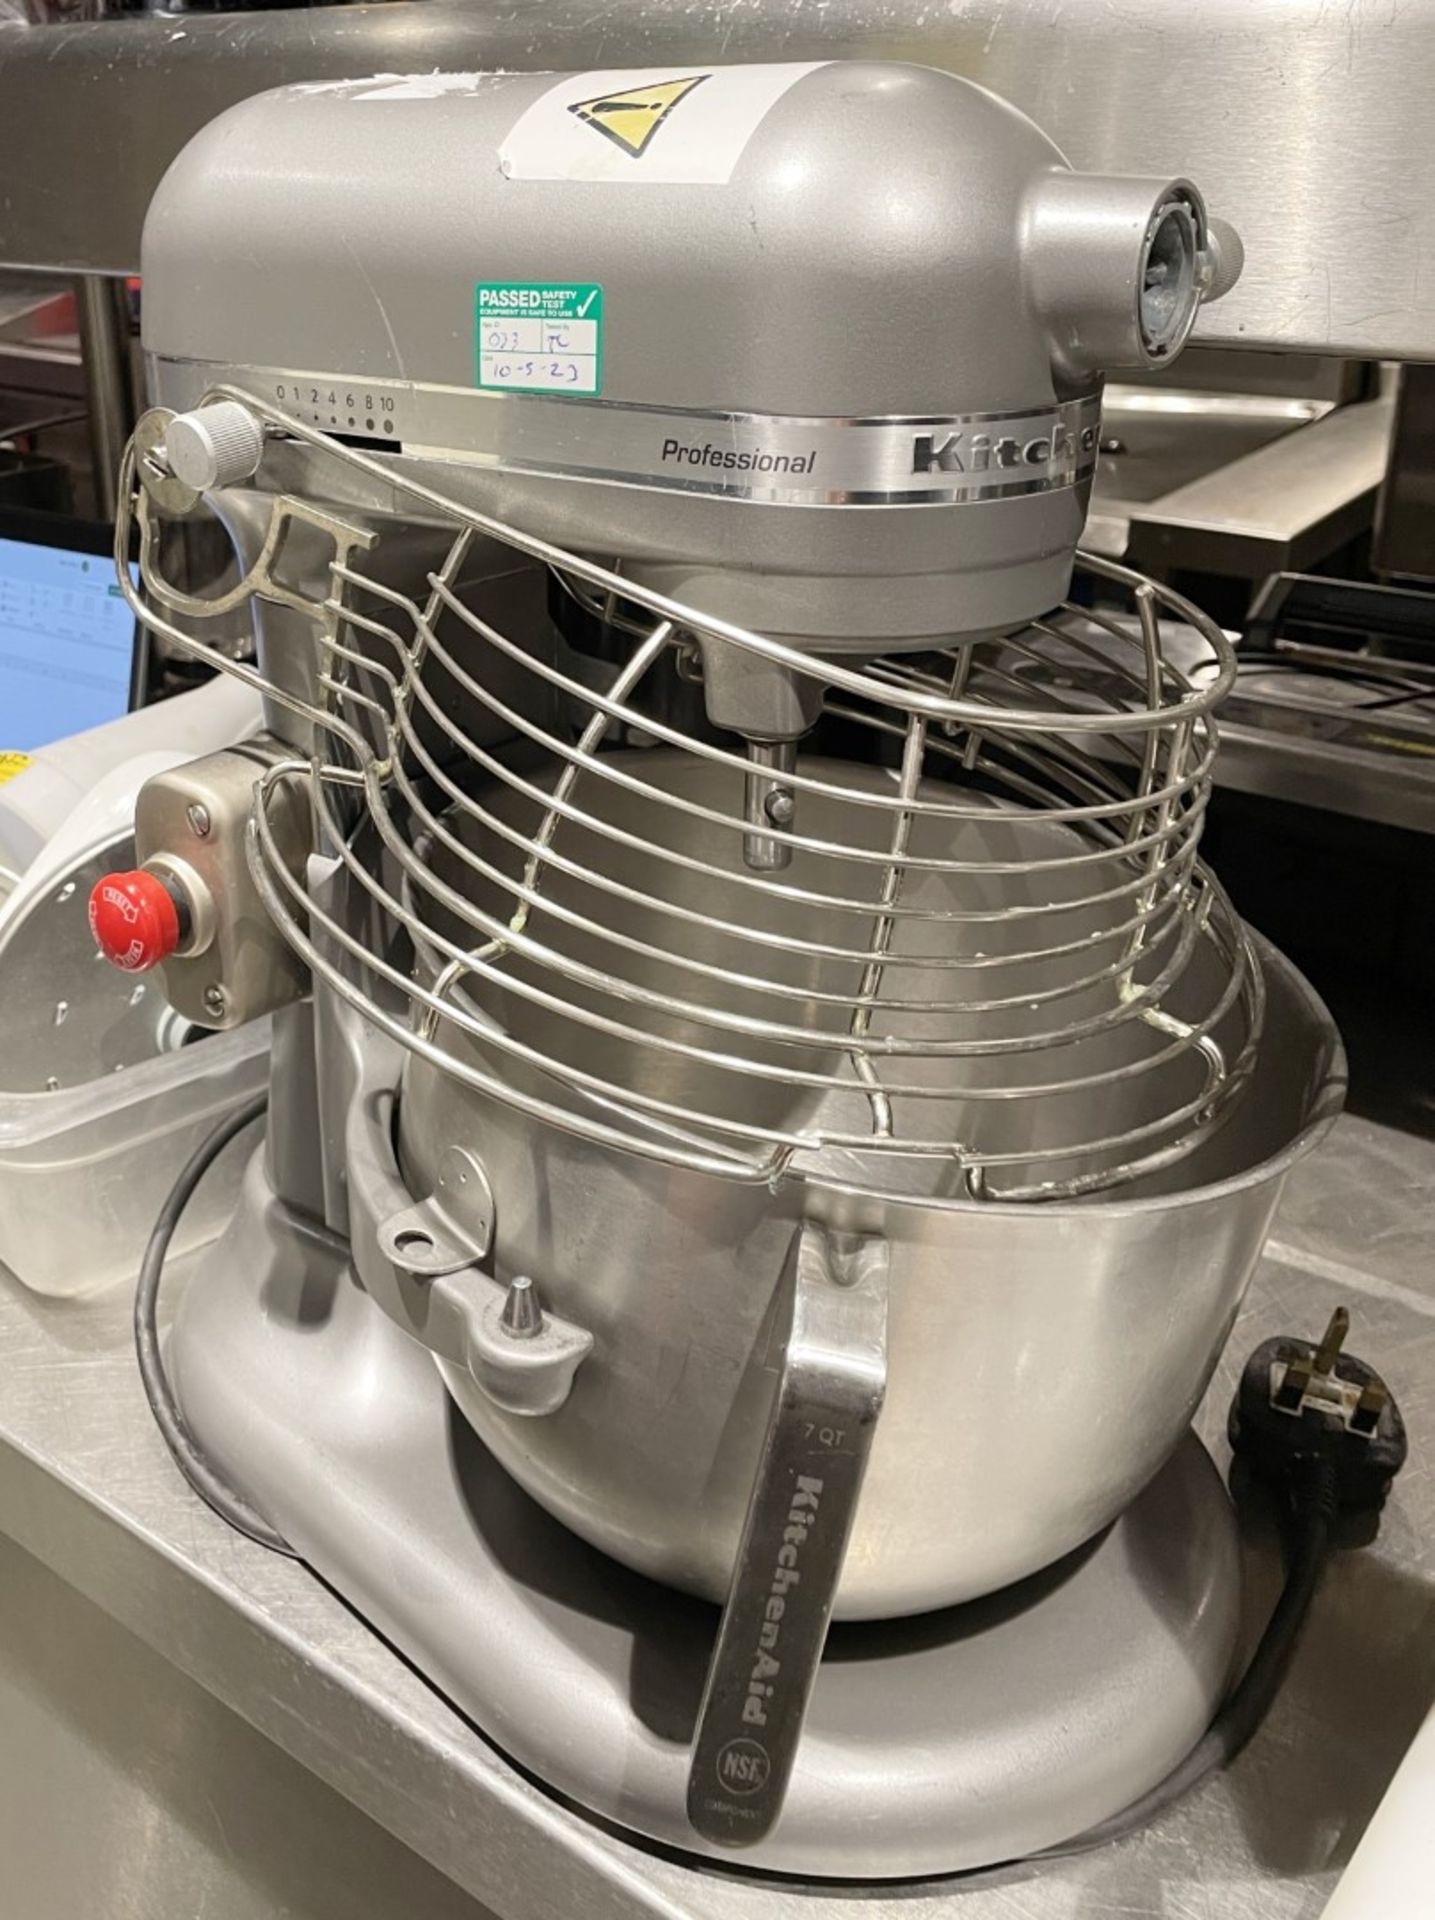 1 x Kitchenaid 6.9 Ltr Commercial Planetary Food Mixer - Model 5KSM7990XBSL - Includes Mixing Bowl - Image 10 of 16